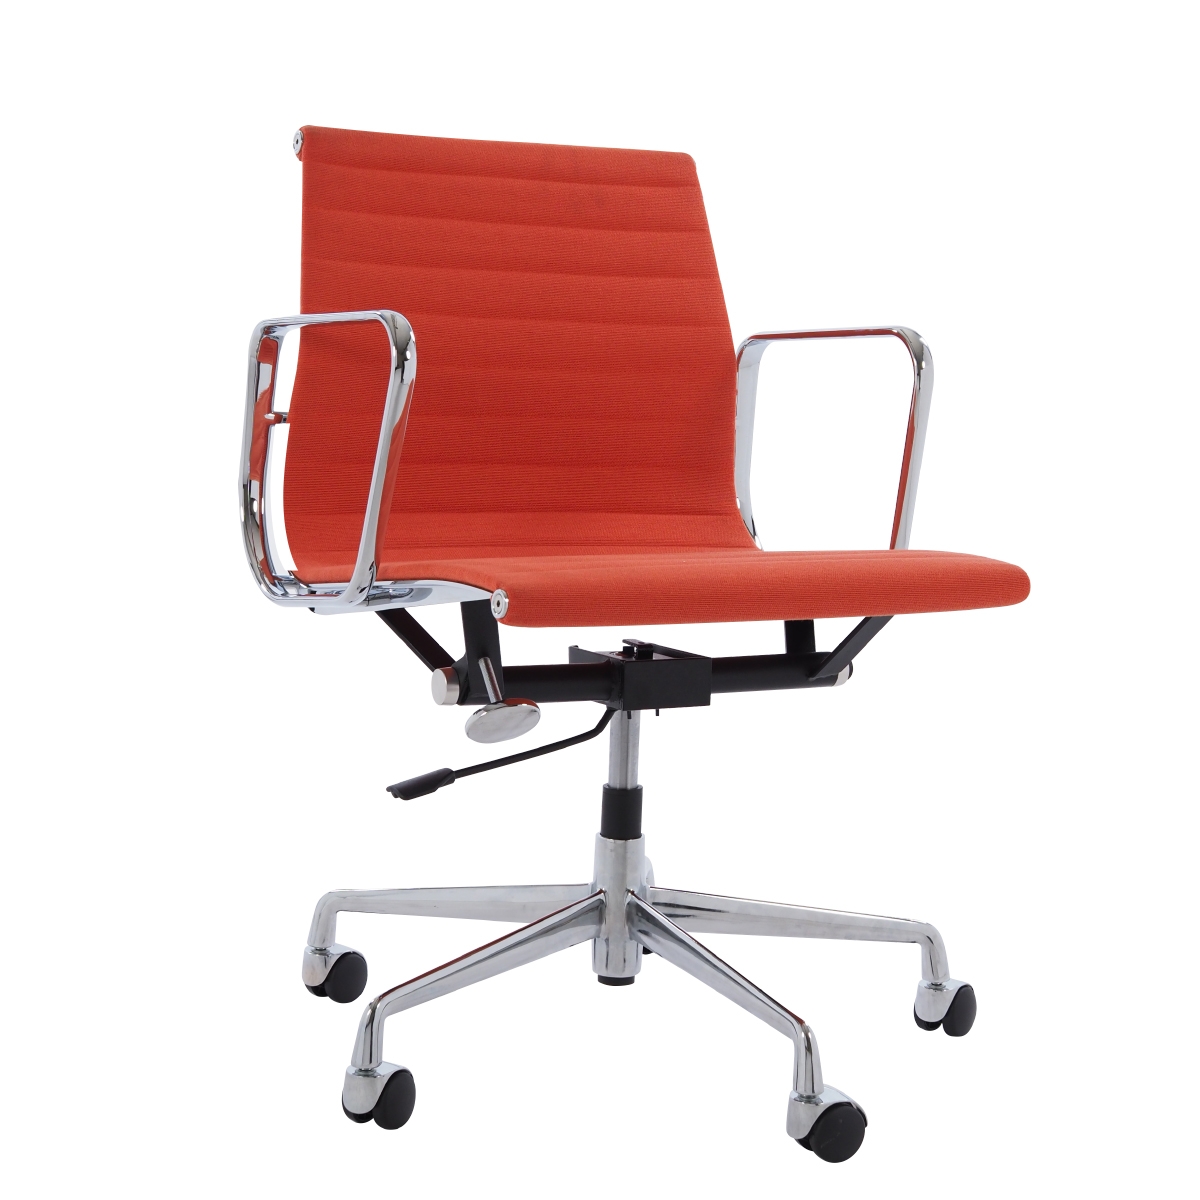 Charles Eames office chair. EA117 Hopsack. Design office chair.